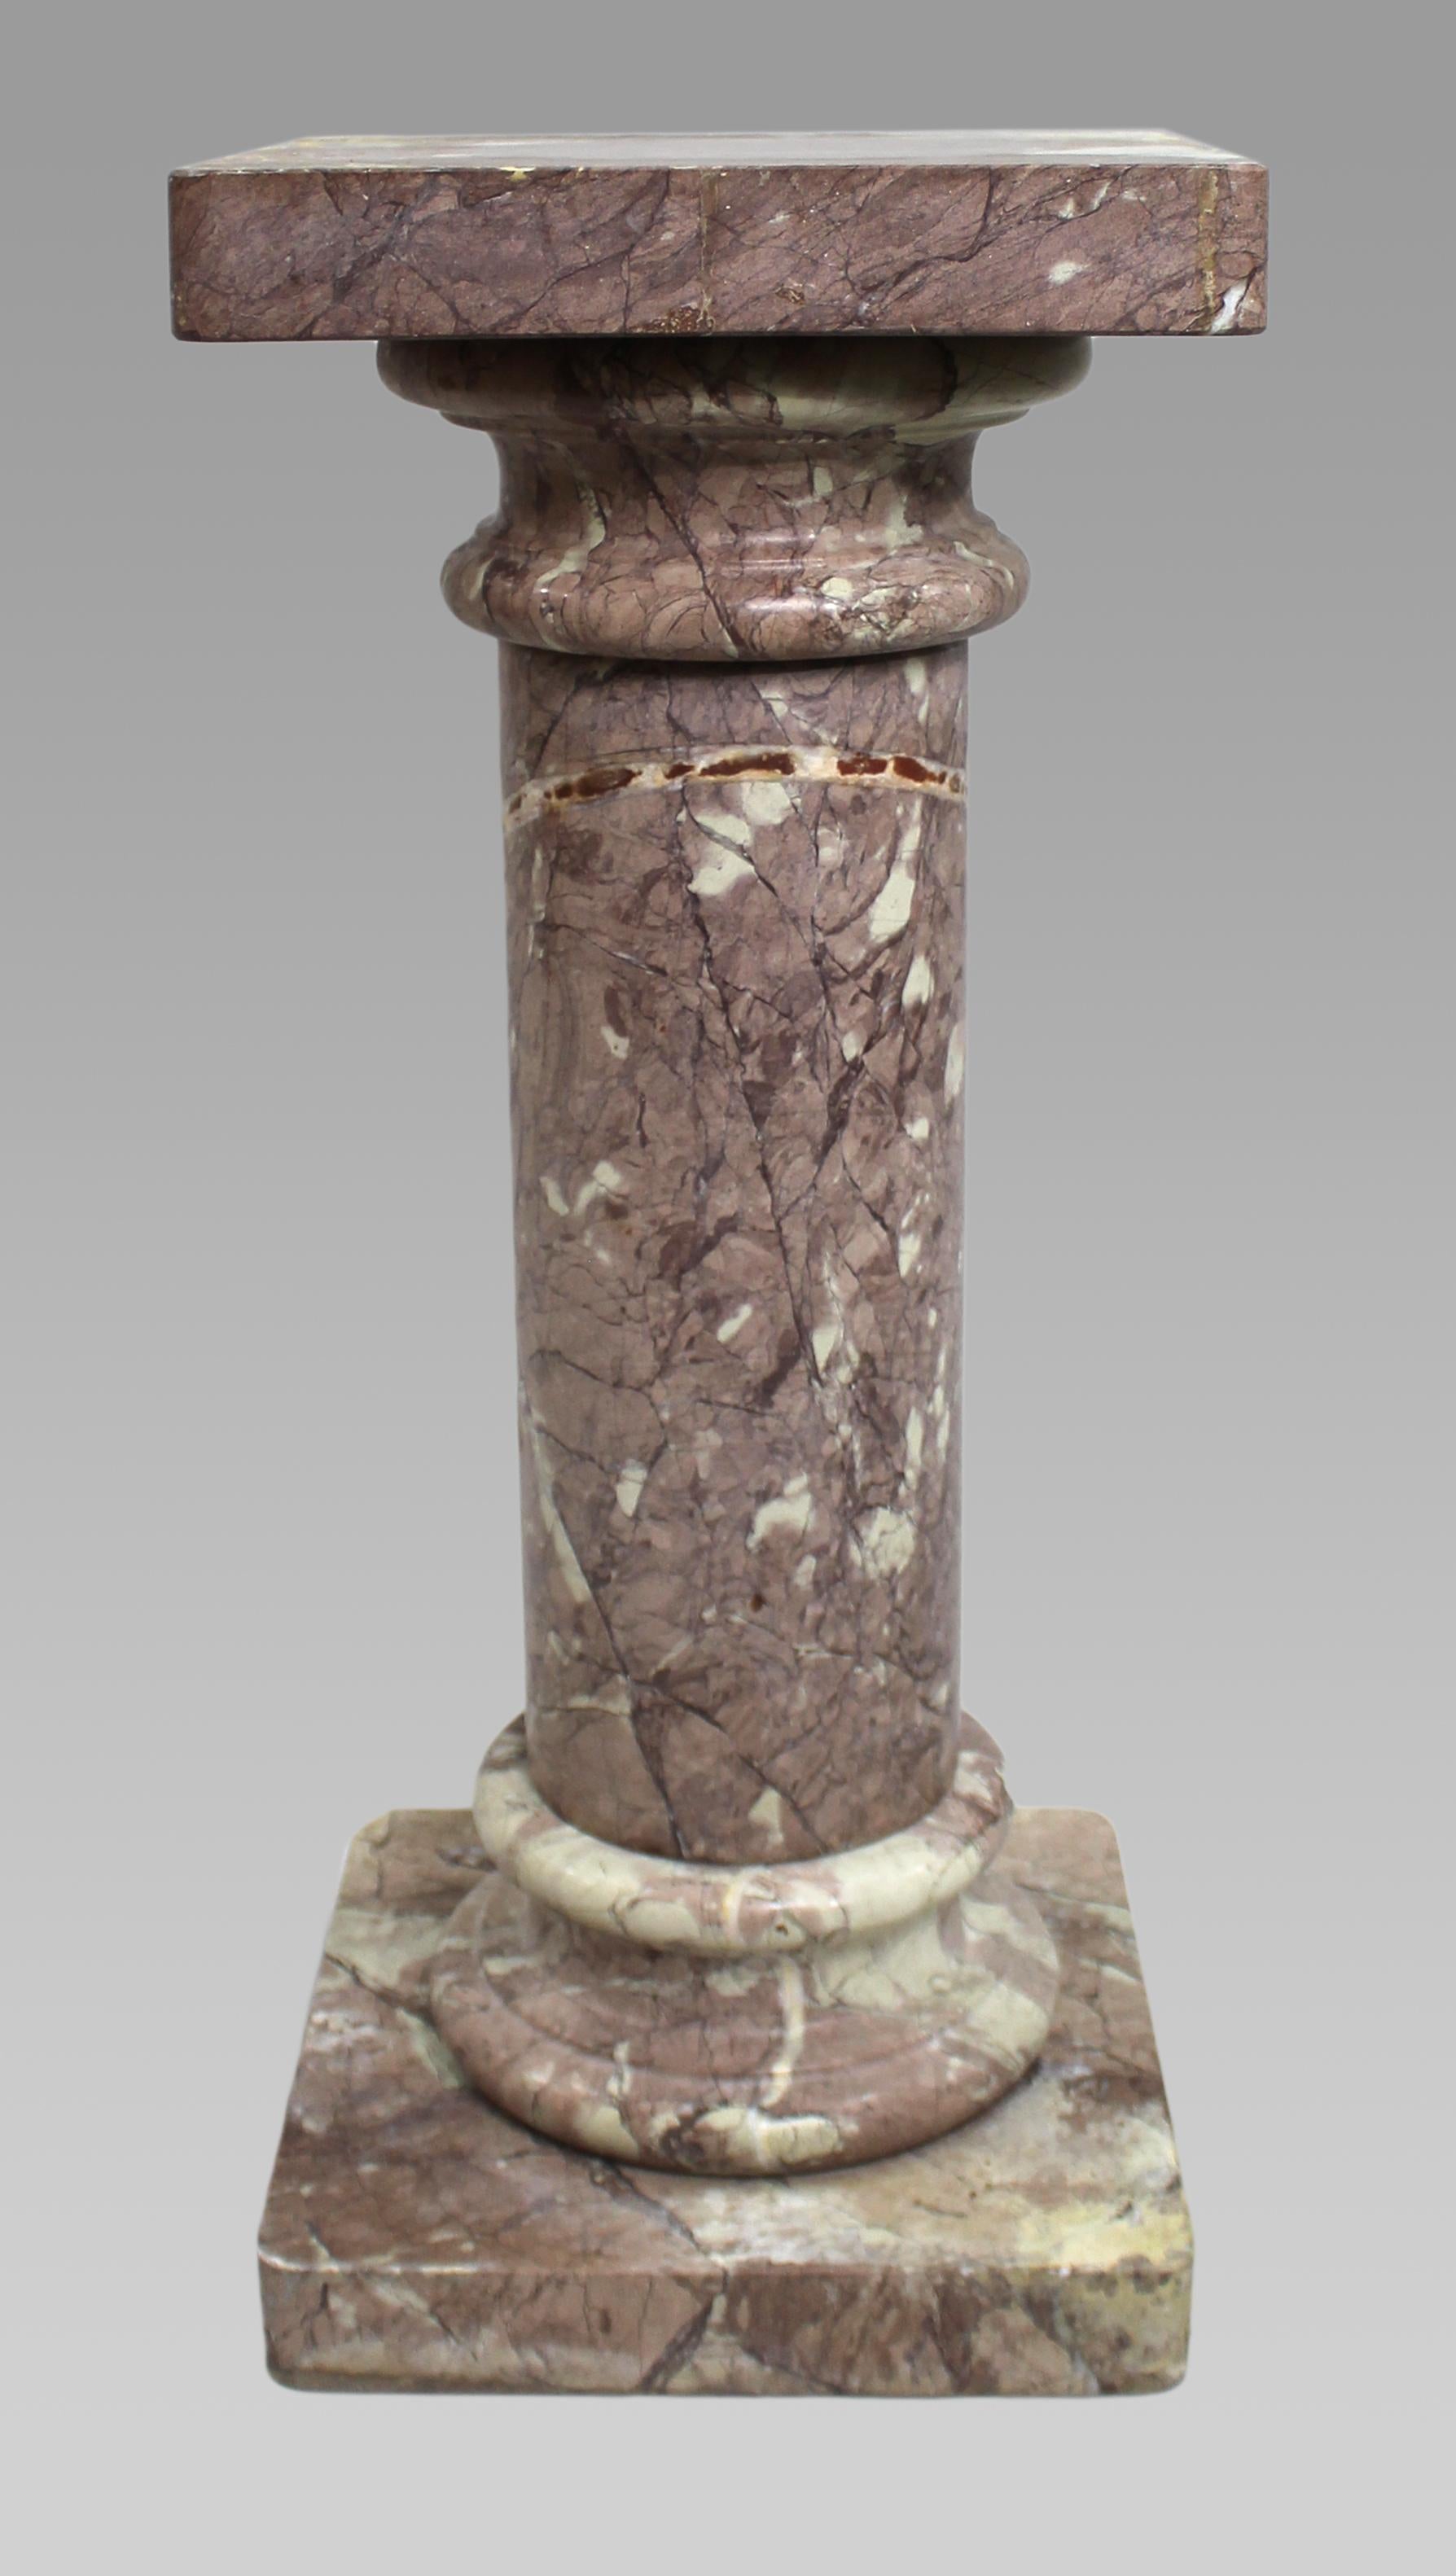 Rouge Marble column pedestal stand


Carved rouge marble pedestal stand

Measures: Width: 12 in. 

Height: 28 inches.
    